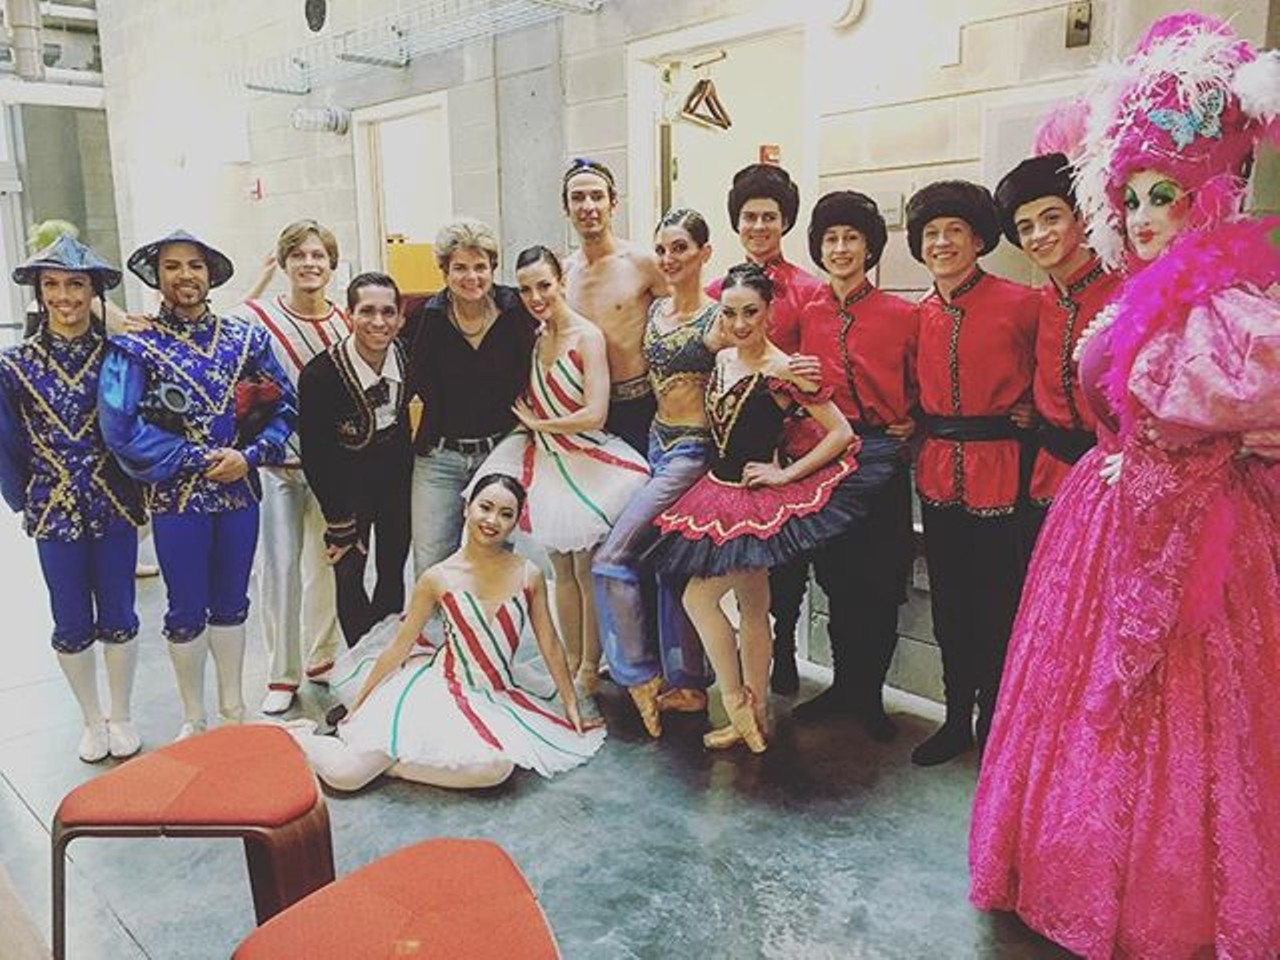 The Orlando Ballet hanging out with District 4 commissioner Patty Sheehan. Photo via drphillipsctr on Instagram.